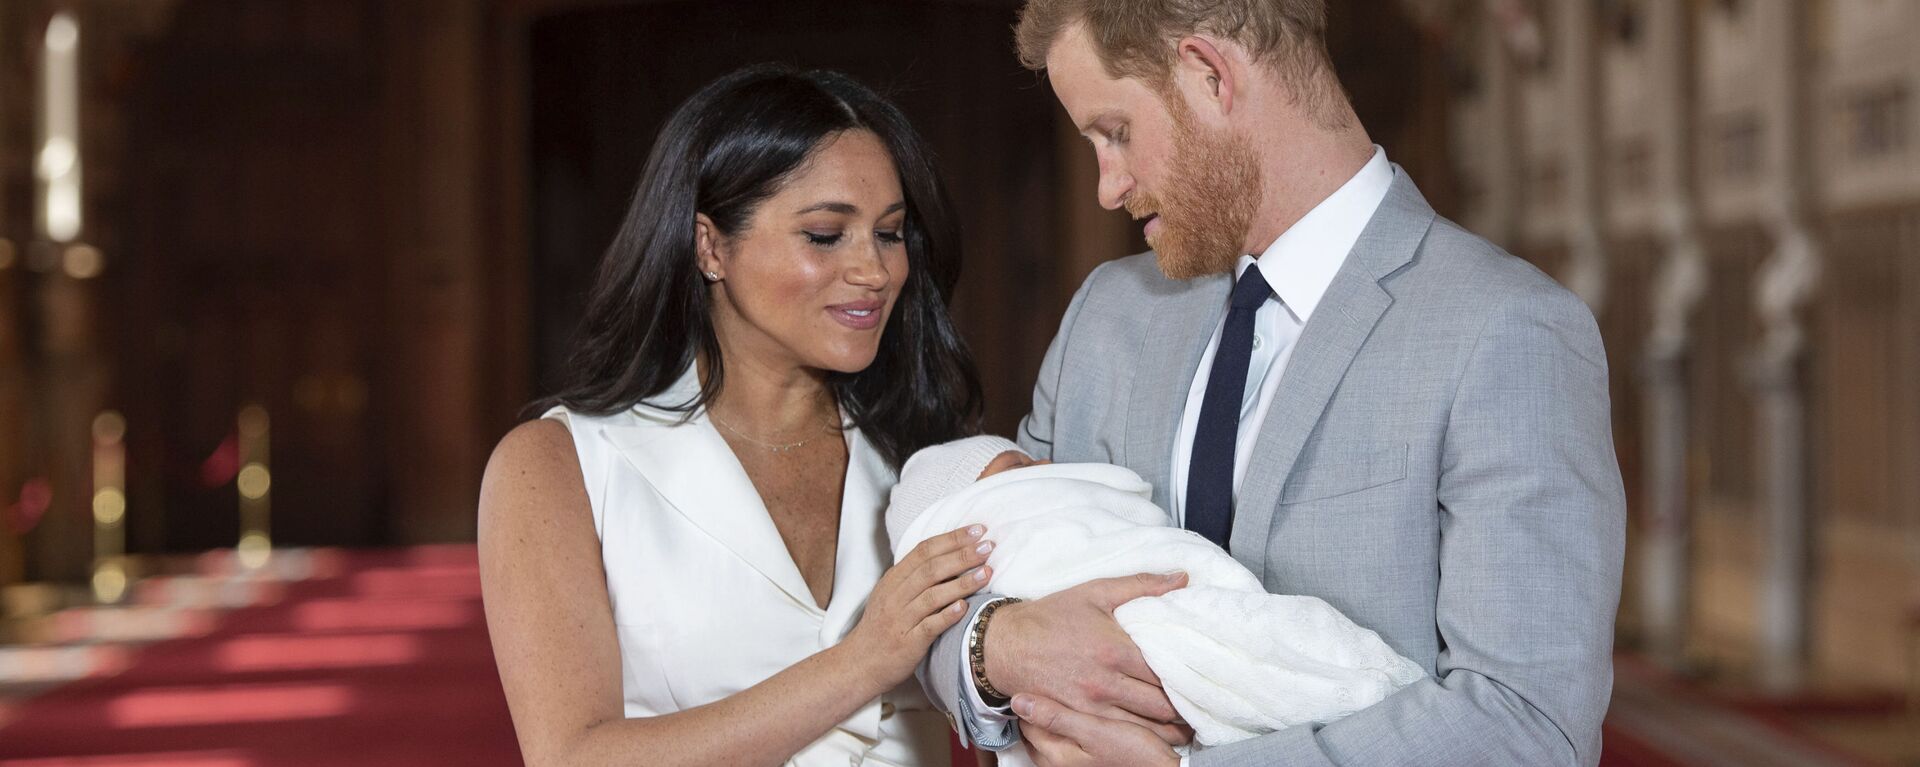 In this Wednesday May 8, 2019 file photo Britain's Prince Harry and Meghan, Duchess of Sussex, pose during a photocall with their newborn son Archie, in St George's Hall at Windsor Castle, Windsor, south England. The Duchess of Sussex has revealed that she had a miscarriage in July. Meghan described the experience in an opinion piece in the New York Times on Wednesday. She wrote: I knew, as I clutched my firstborn child, that I was losing my second. The former Meghan Markle and husband Prince Harry have a son, Archie, born in 2019.  - Sputnik International, 1920, 08.03.2021